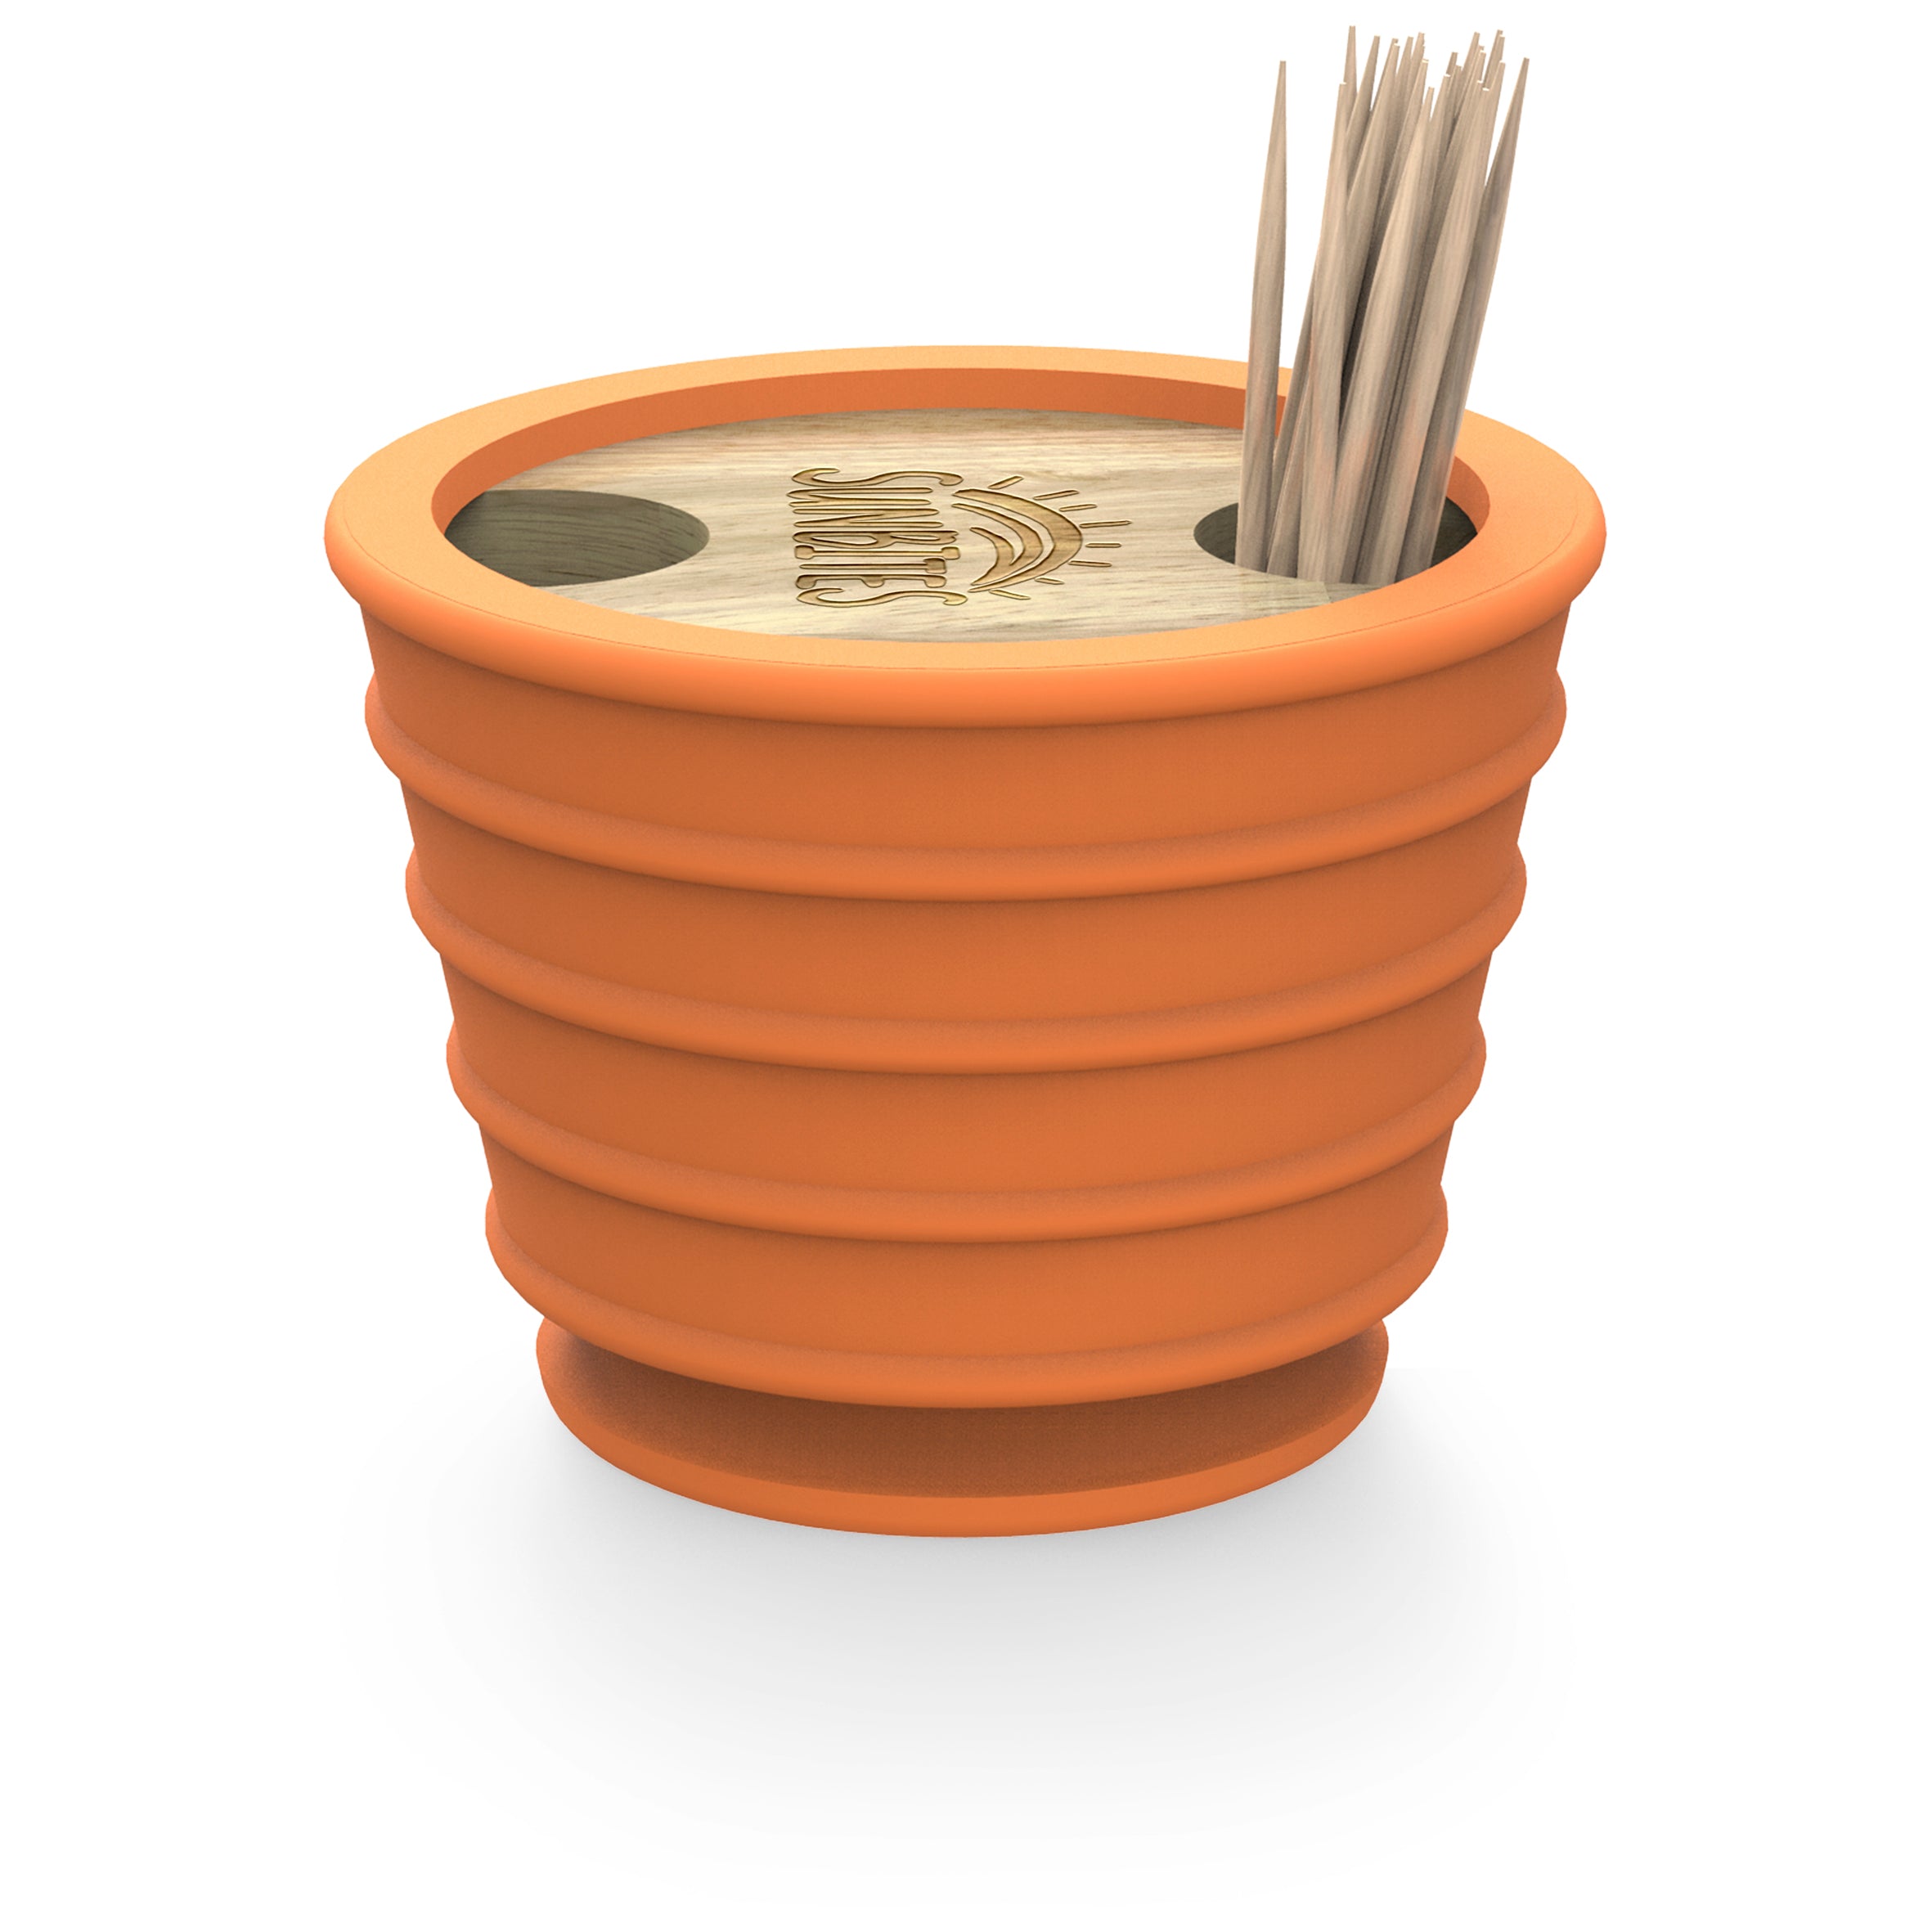 Andy Cartwright Toothpick Holder & Dispense